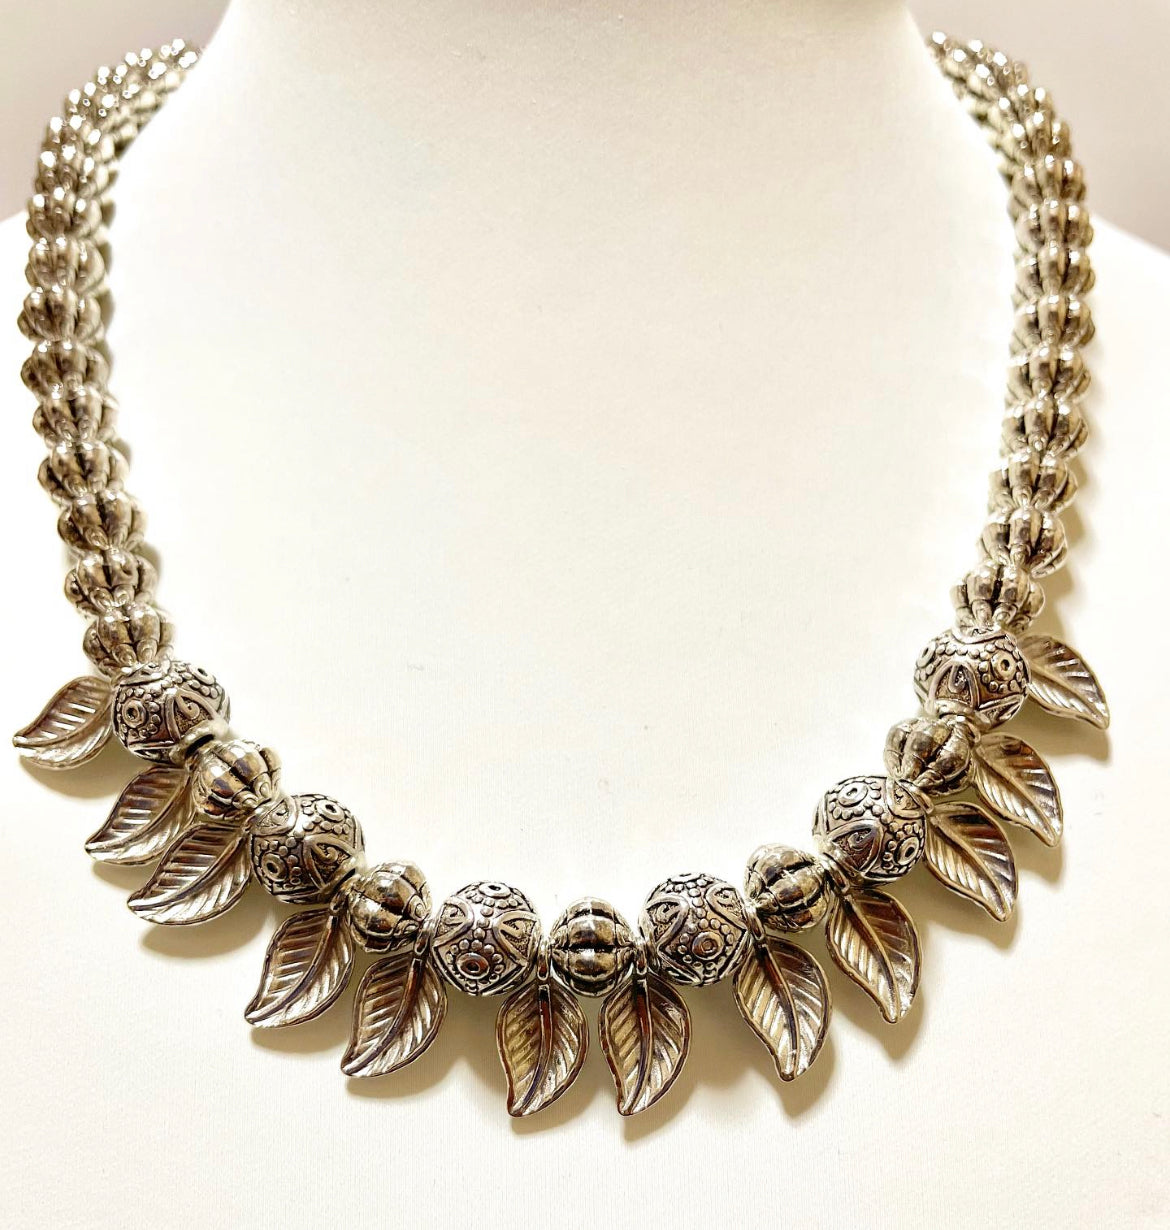 Beautifully crafted metal beads necklace !